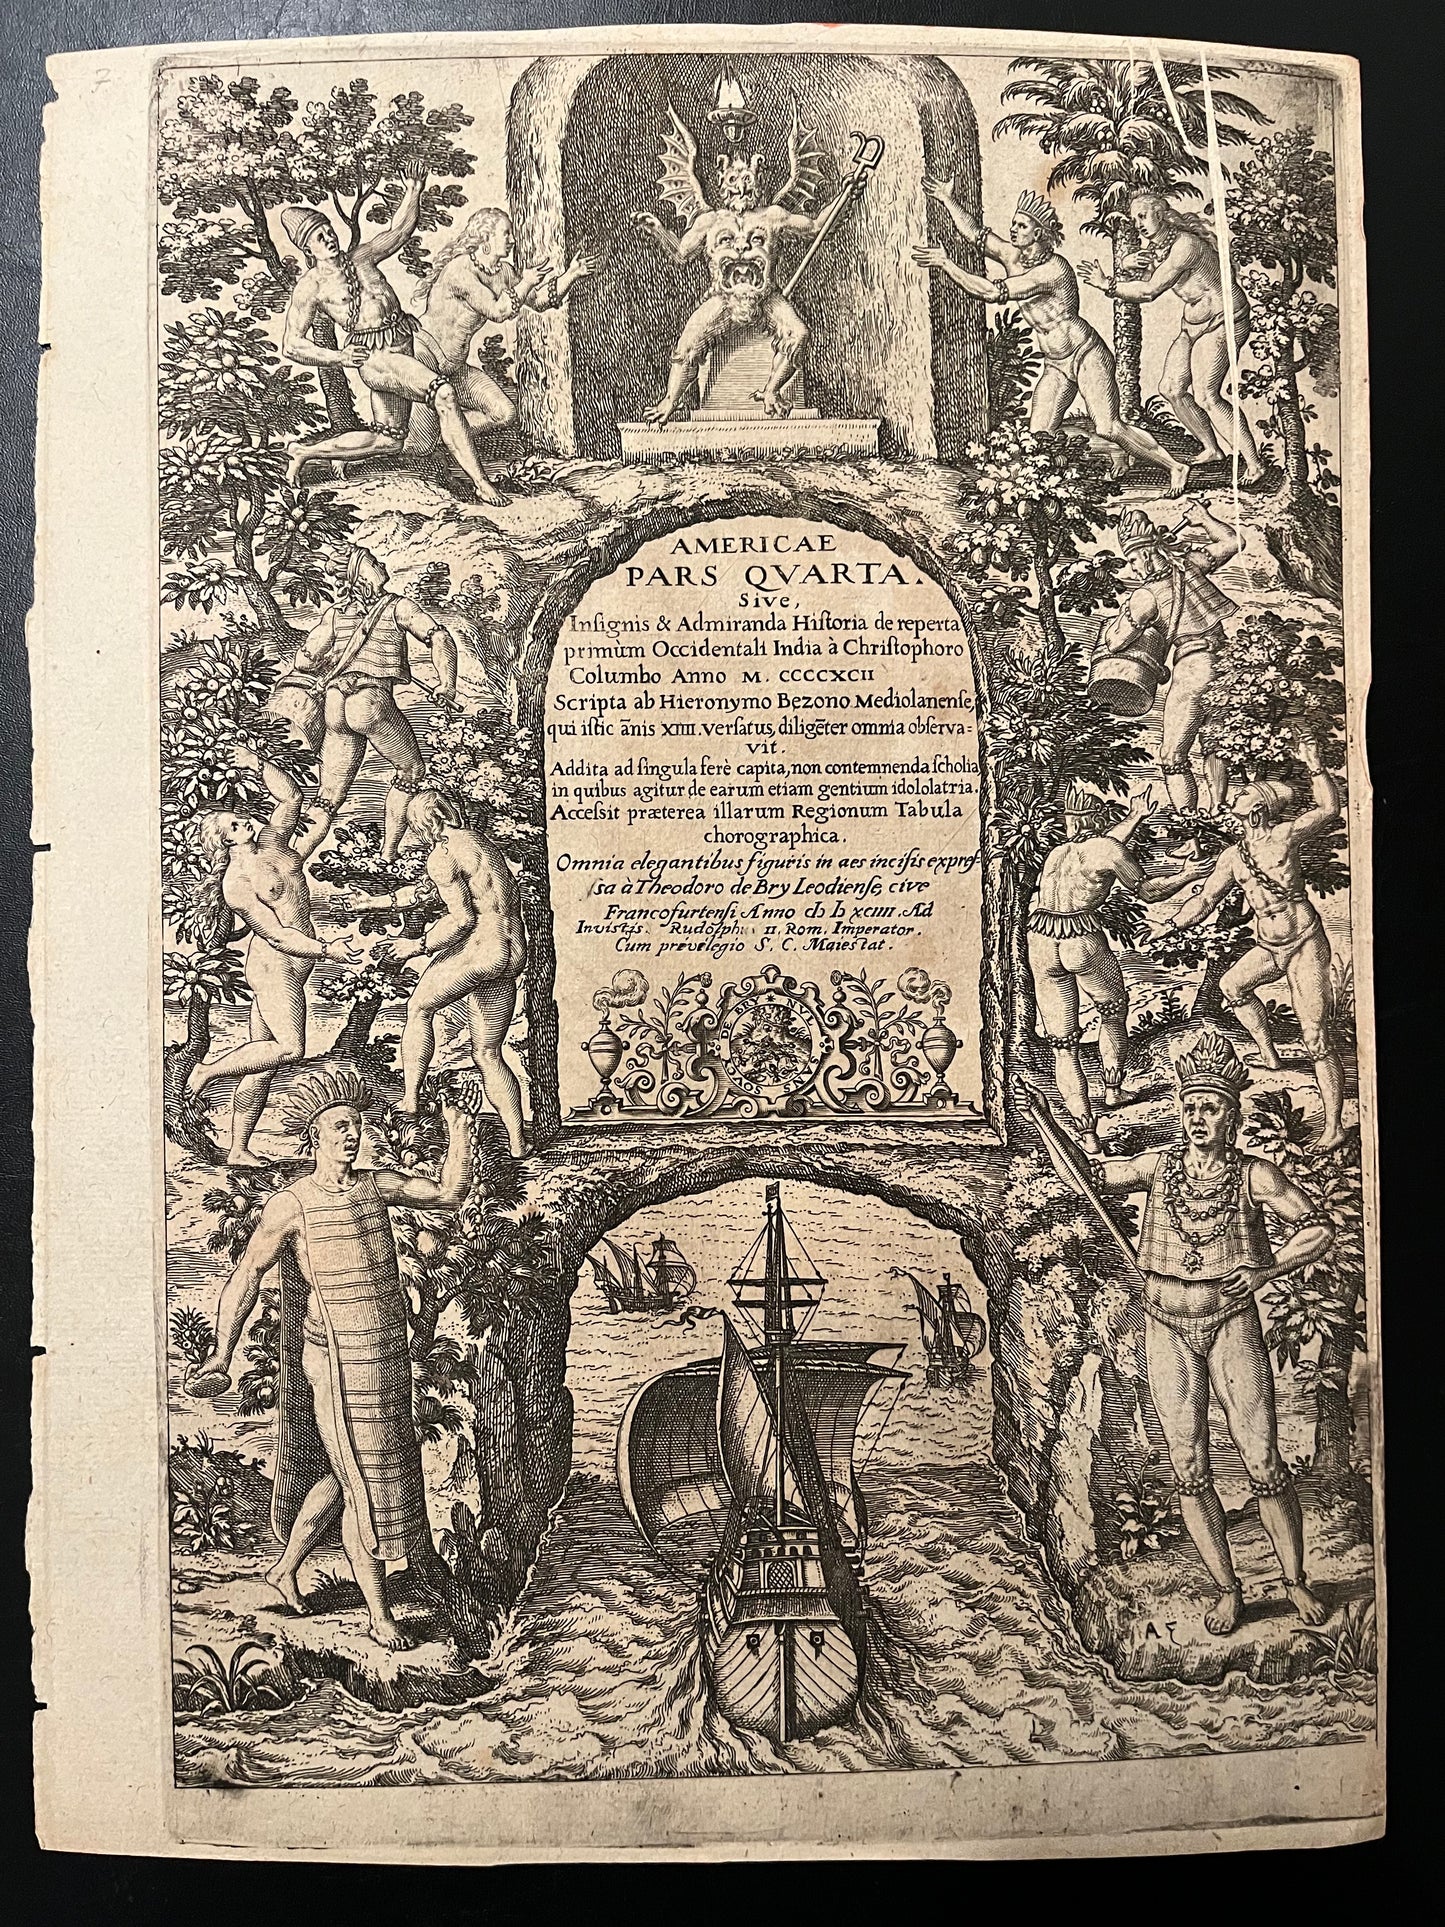 Title Page to Part 4 of the Grands Voyages De Bry Benzoni / Columbus 1594